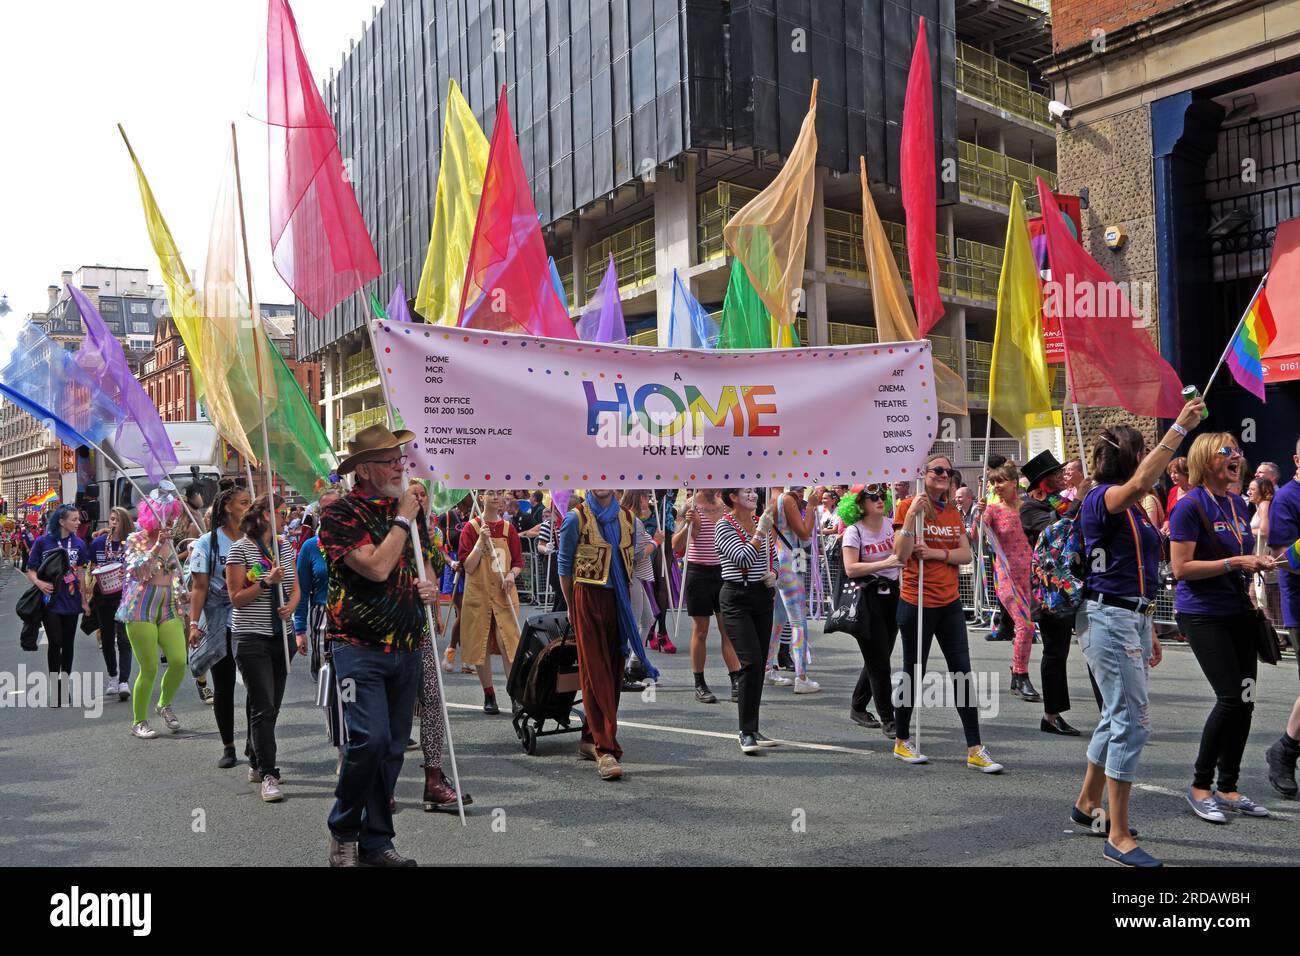 Home at Manchester Pride Festival parade, 36 Whitworth Street, Manchester, Angleterre, Royaume-Uni, M1 3NR Banque D'Images